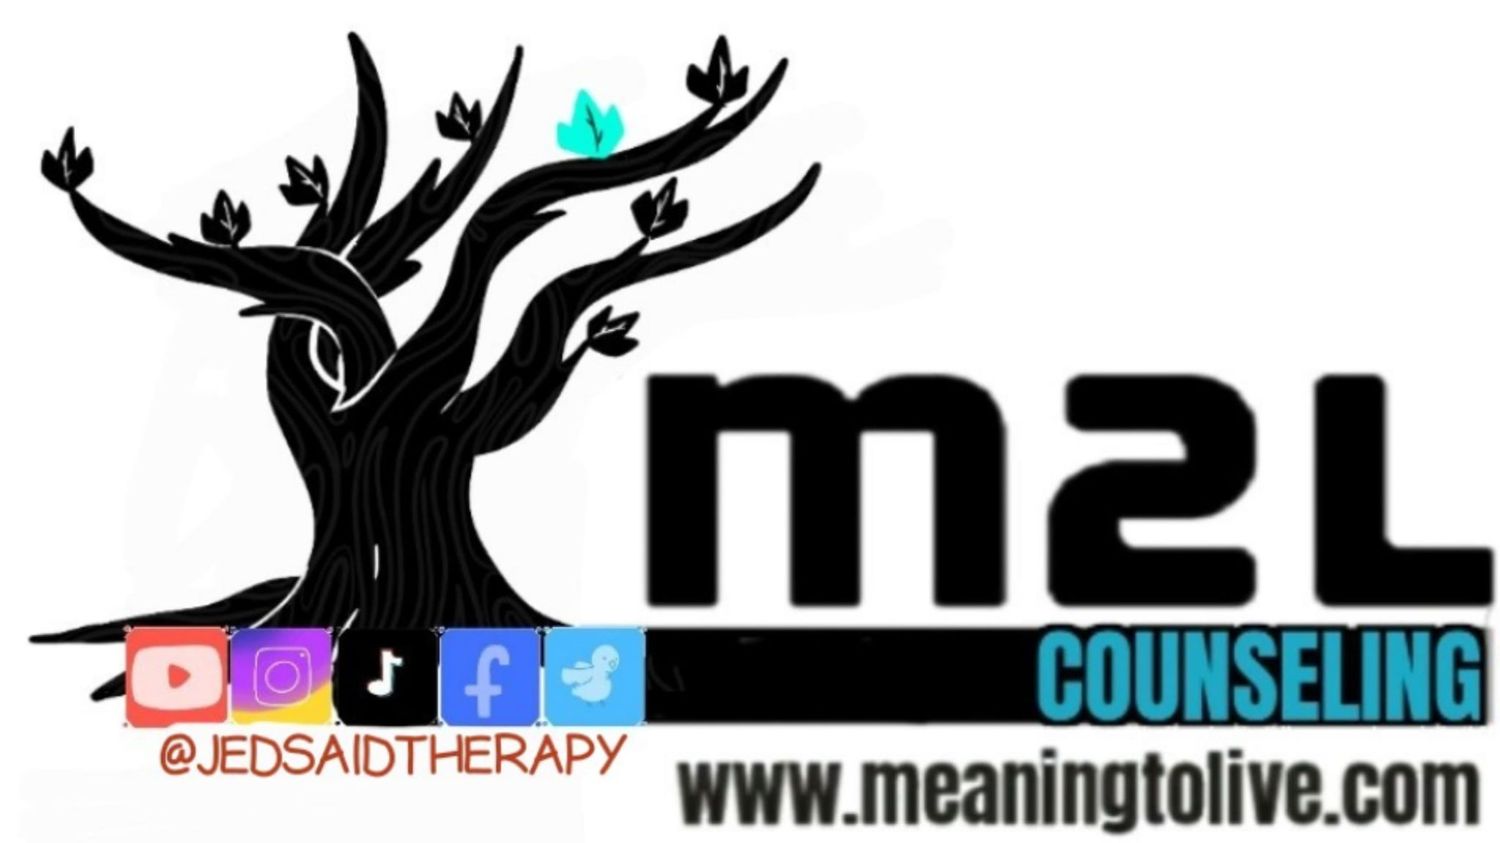 Gallery Photo of Meaning To Live Counseling